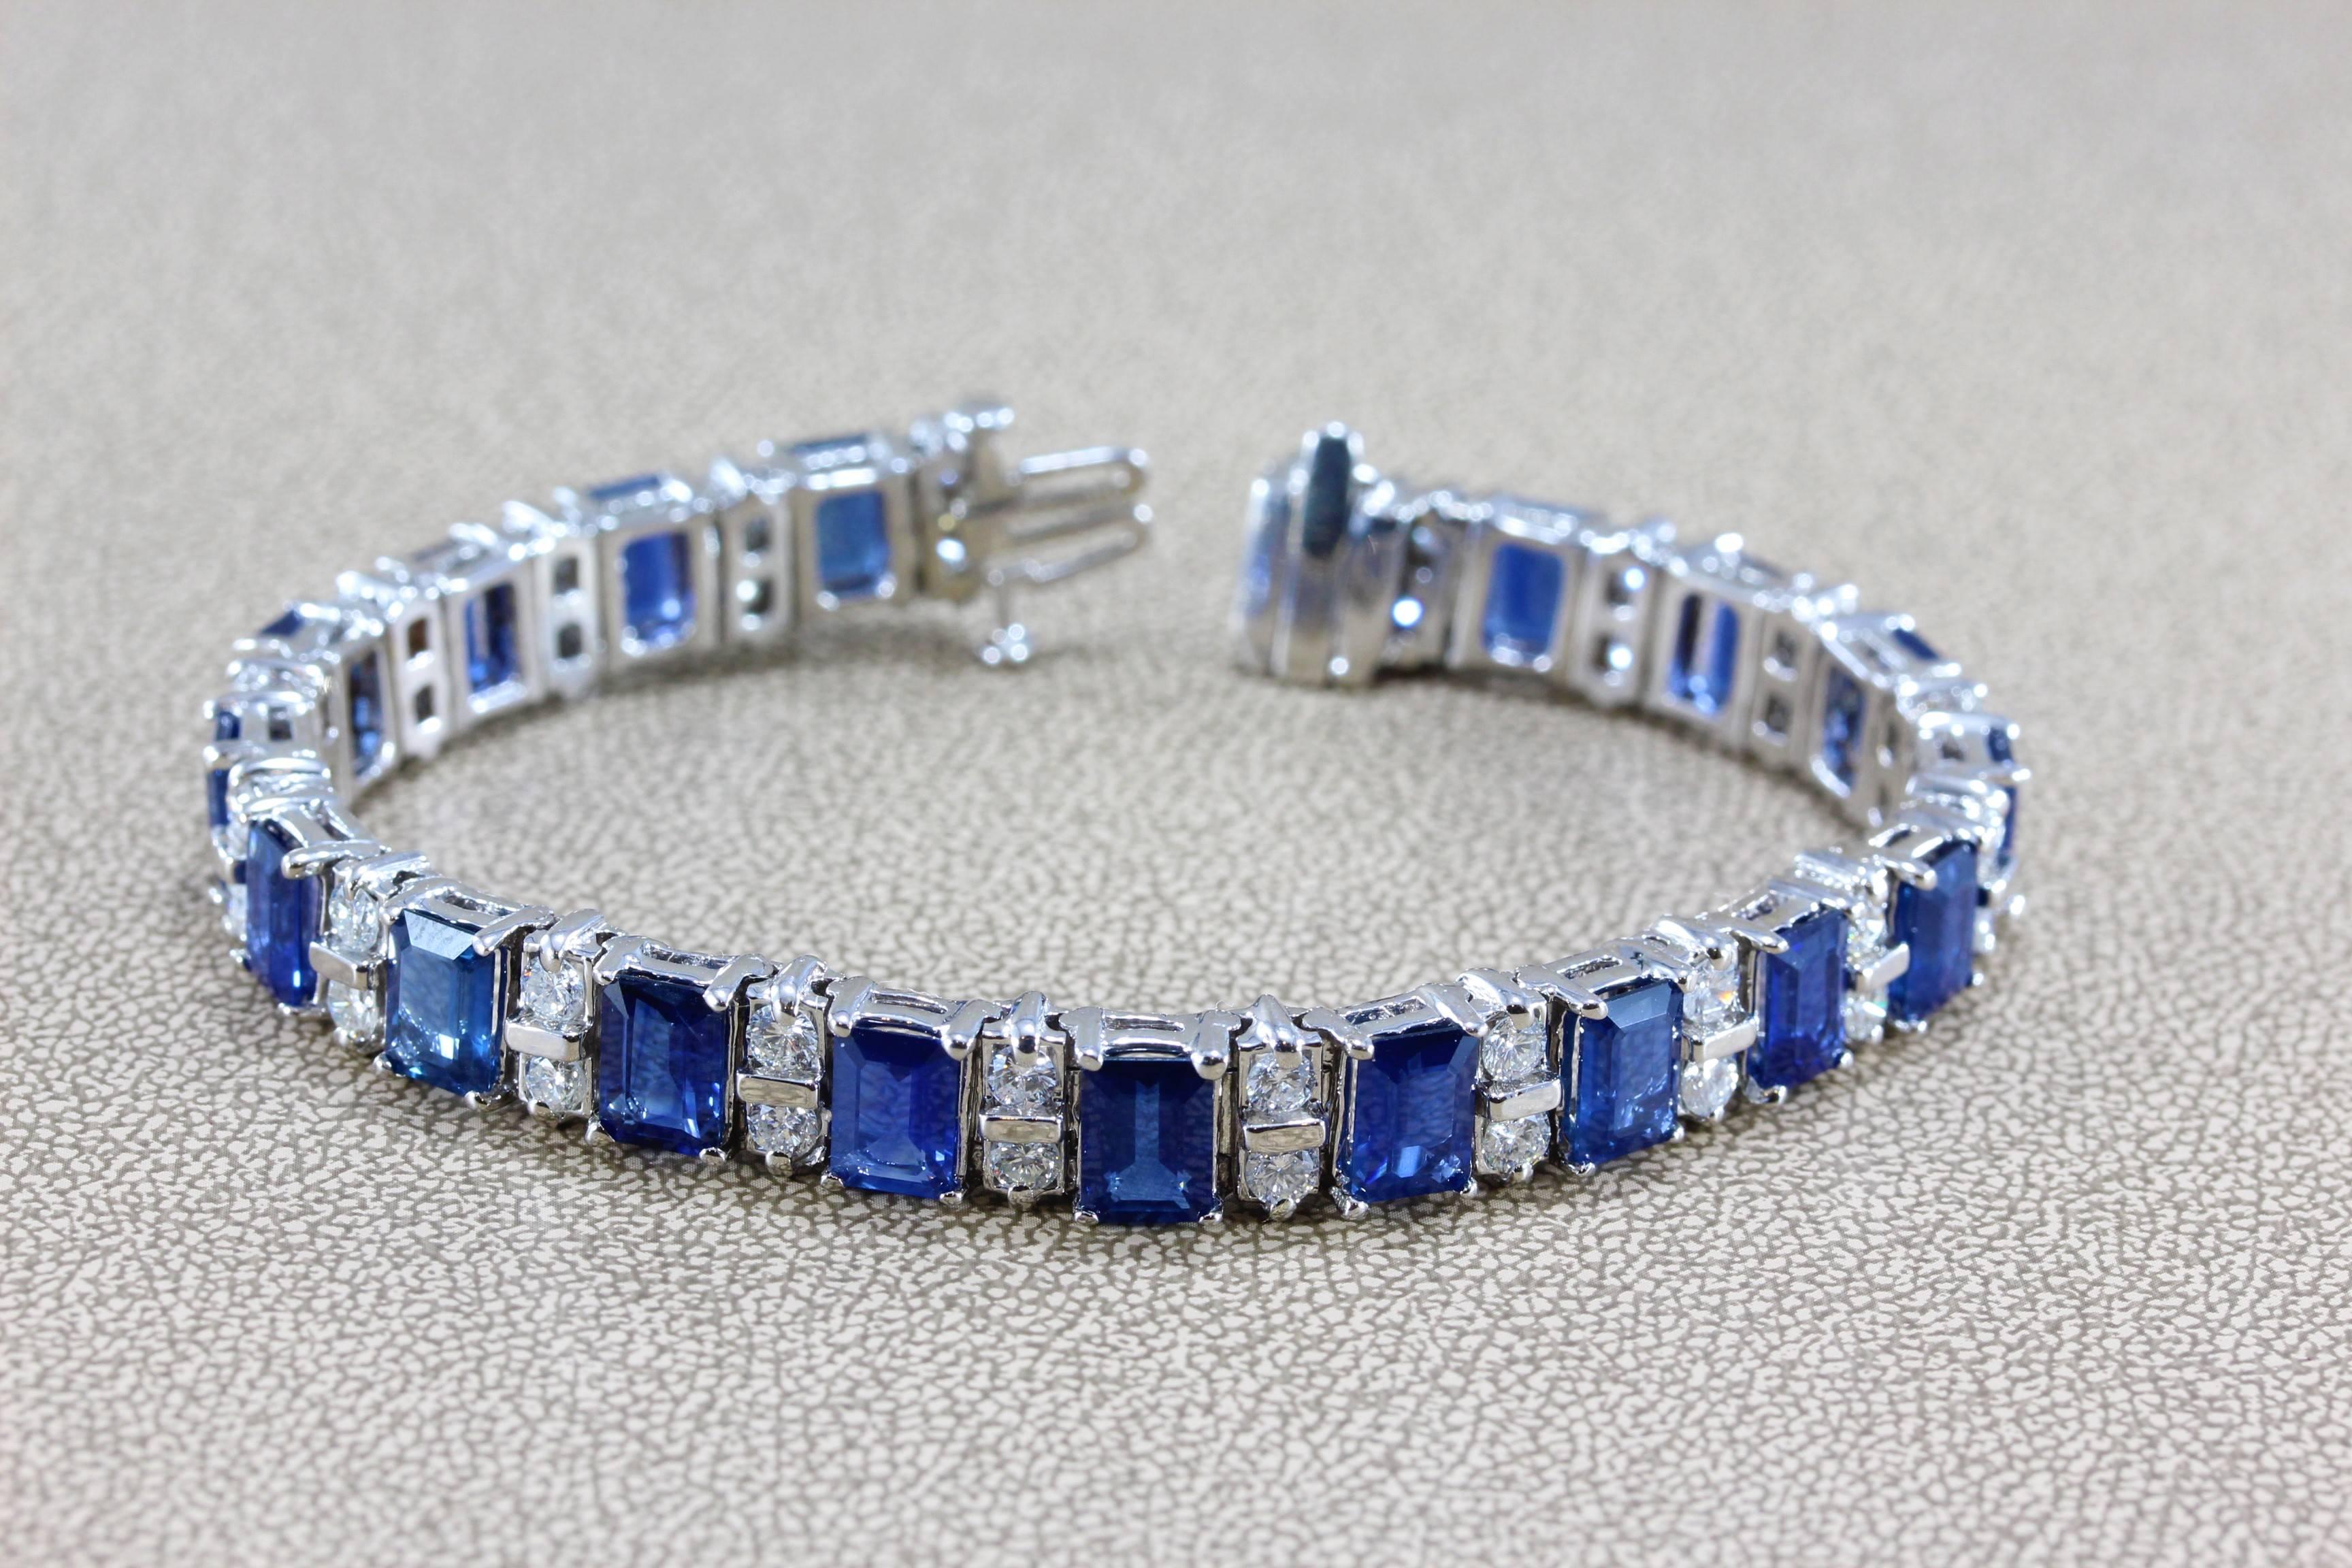 This bracelet features 18 deeply saturated vivid blue sapphires weighting each over 2 carats for a total weight of 42 carats. There are 3.40 carats of full-cut diamonds to accent the blue sapphires, which are all set in white gold. A bold bracelet